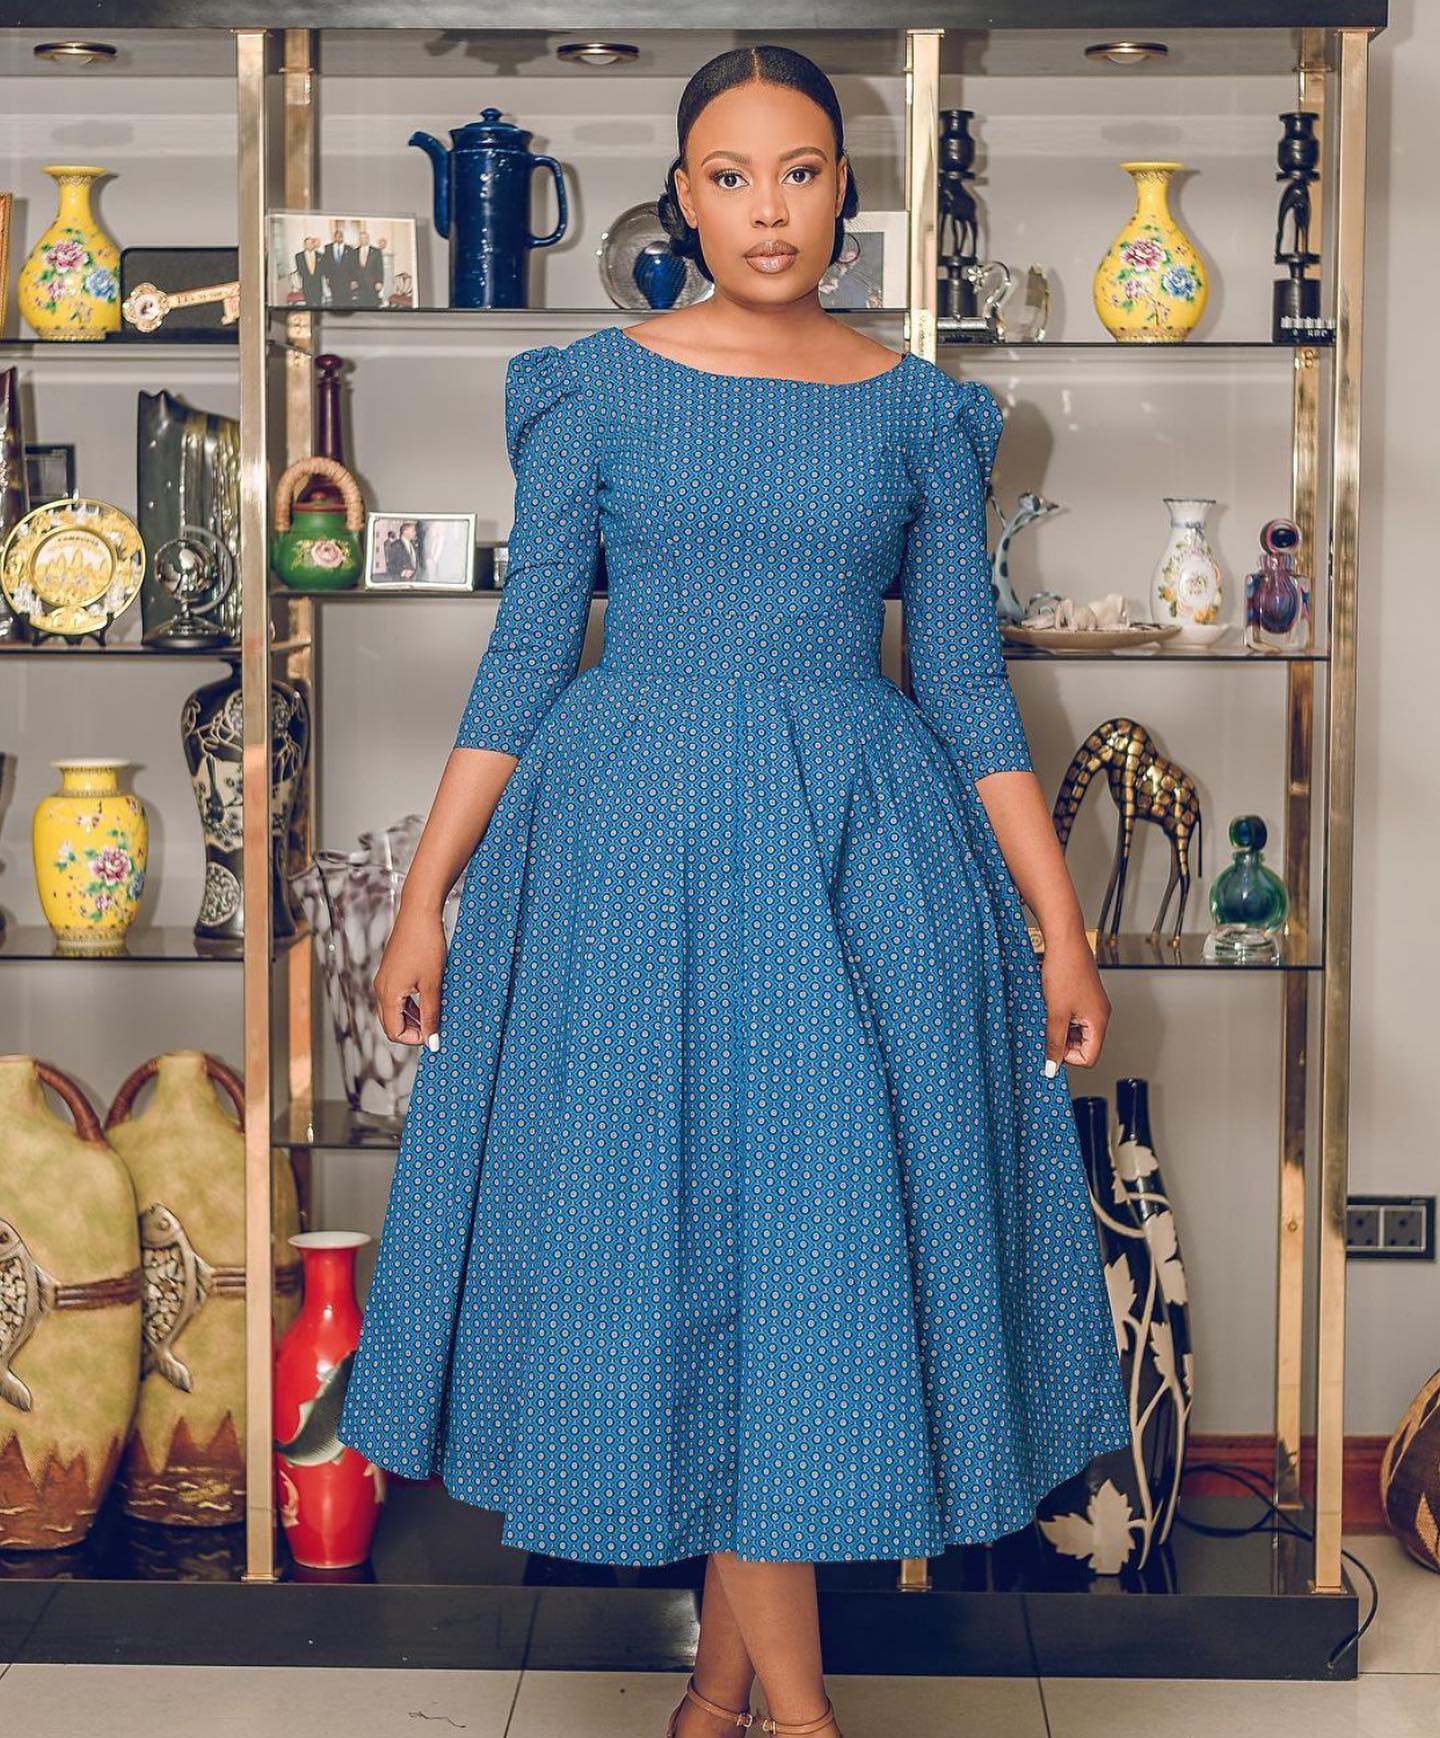 Amazing Tswana Dresses: A Fabric Steeped in History and Tradition 19